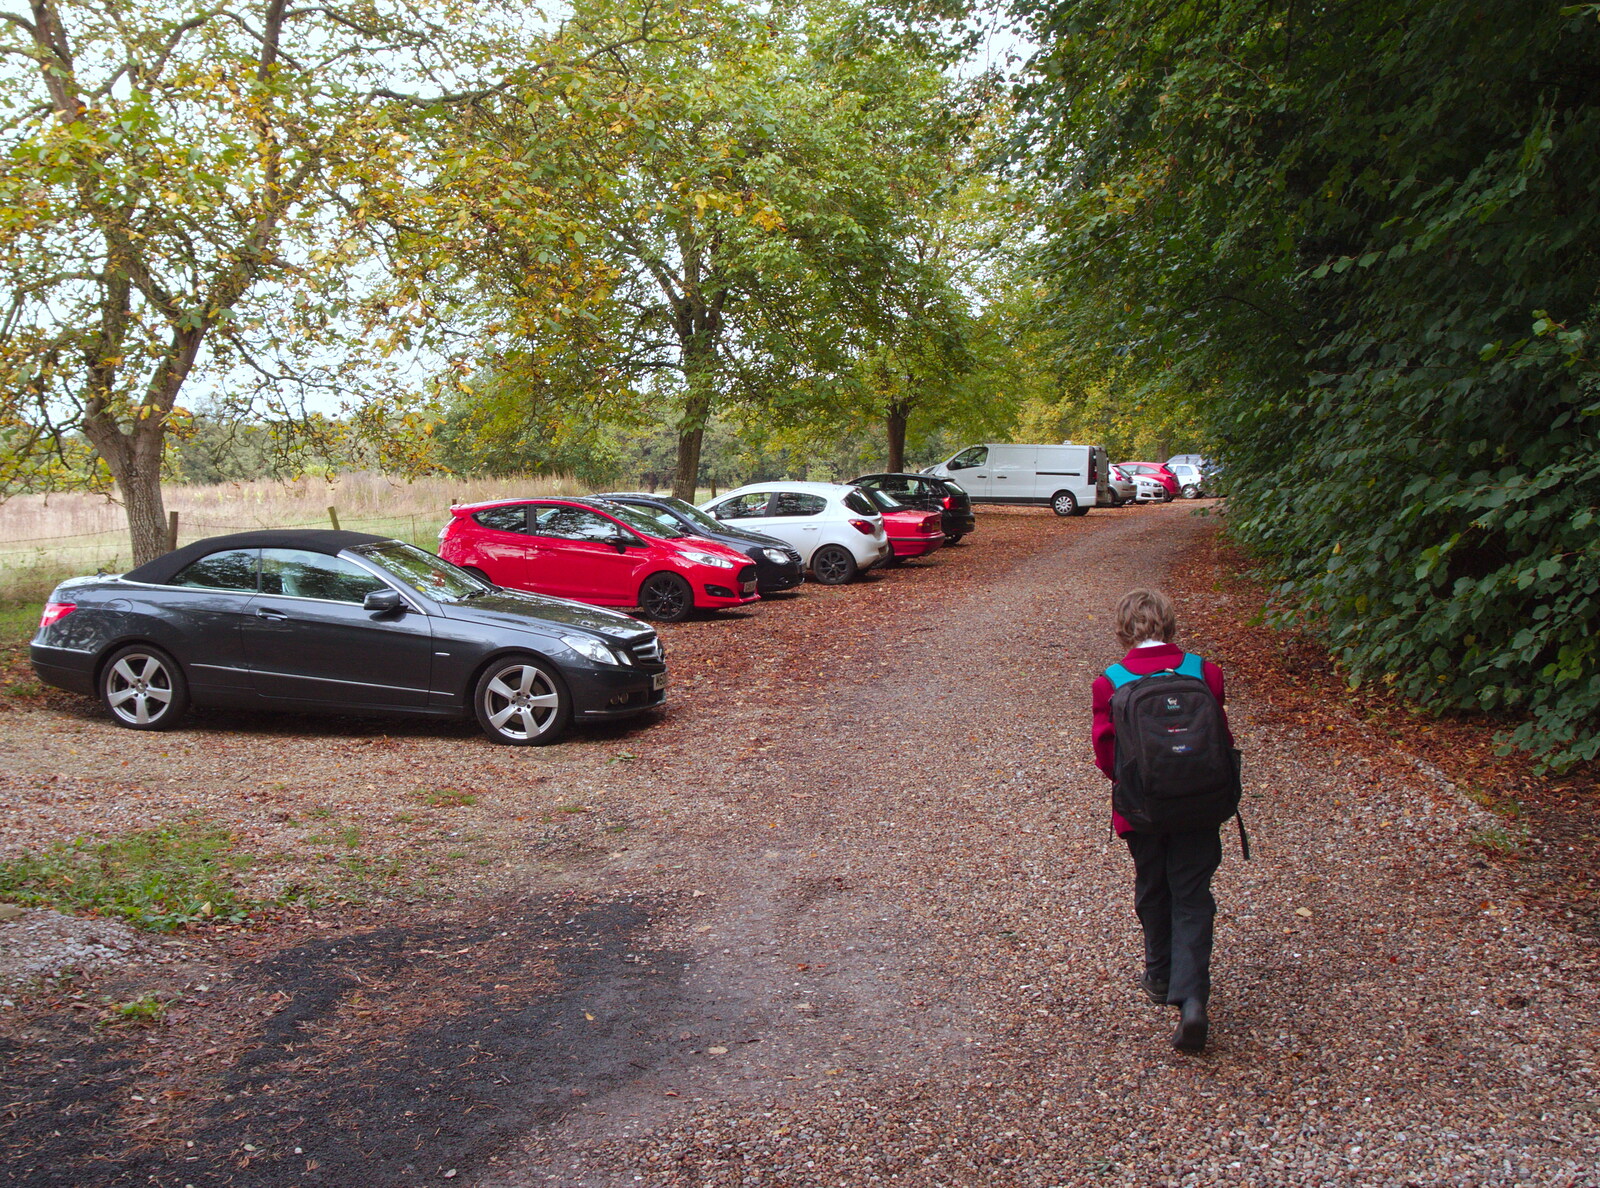 Fred stumps off back to the car from The GSB at Stowlangtoft, Beavers, and More XR Rebellions, Suffolk, Norfolk and London - 16th October 2019